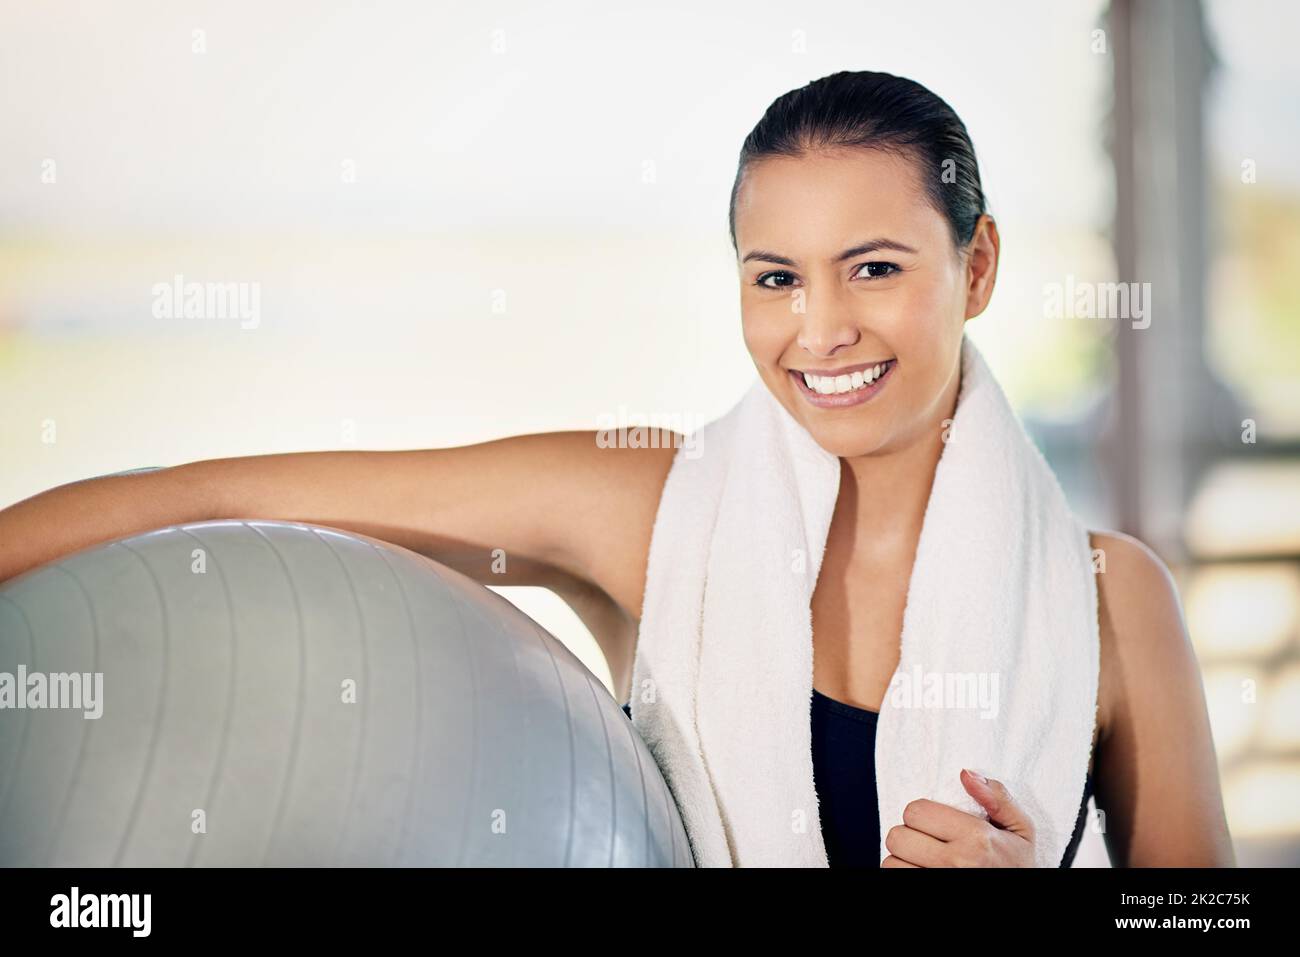 Endorphins make me smile. Cropped portrait of a young woman carrying her exercise ball. Stock Photo